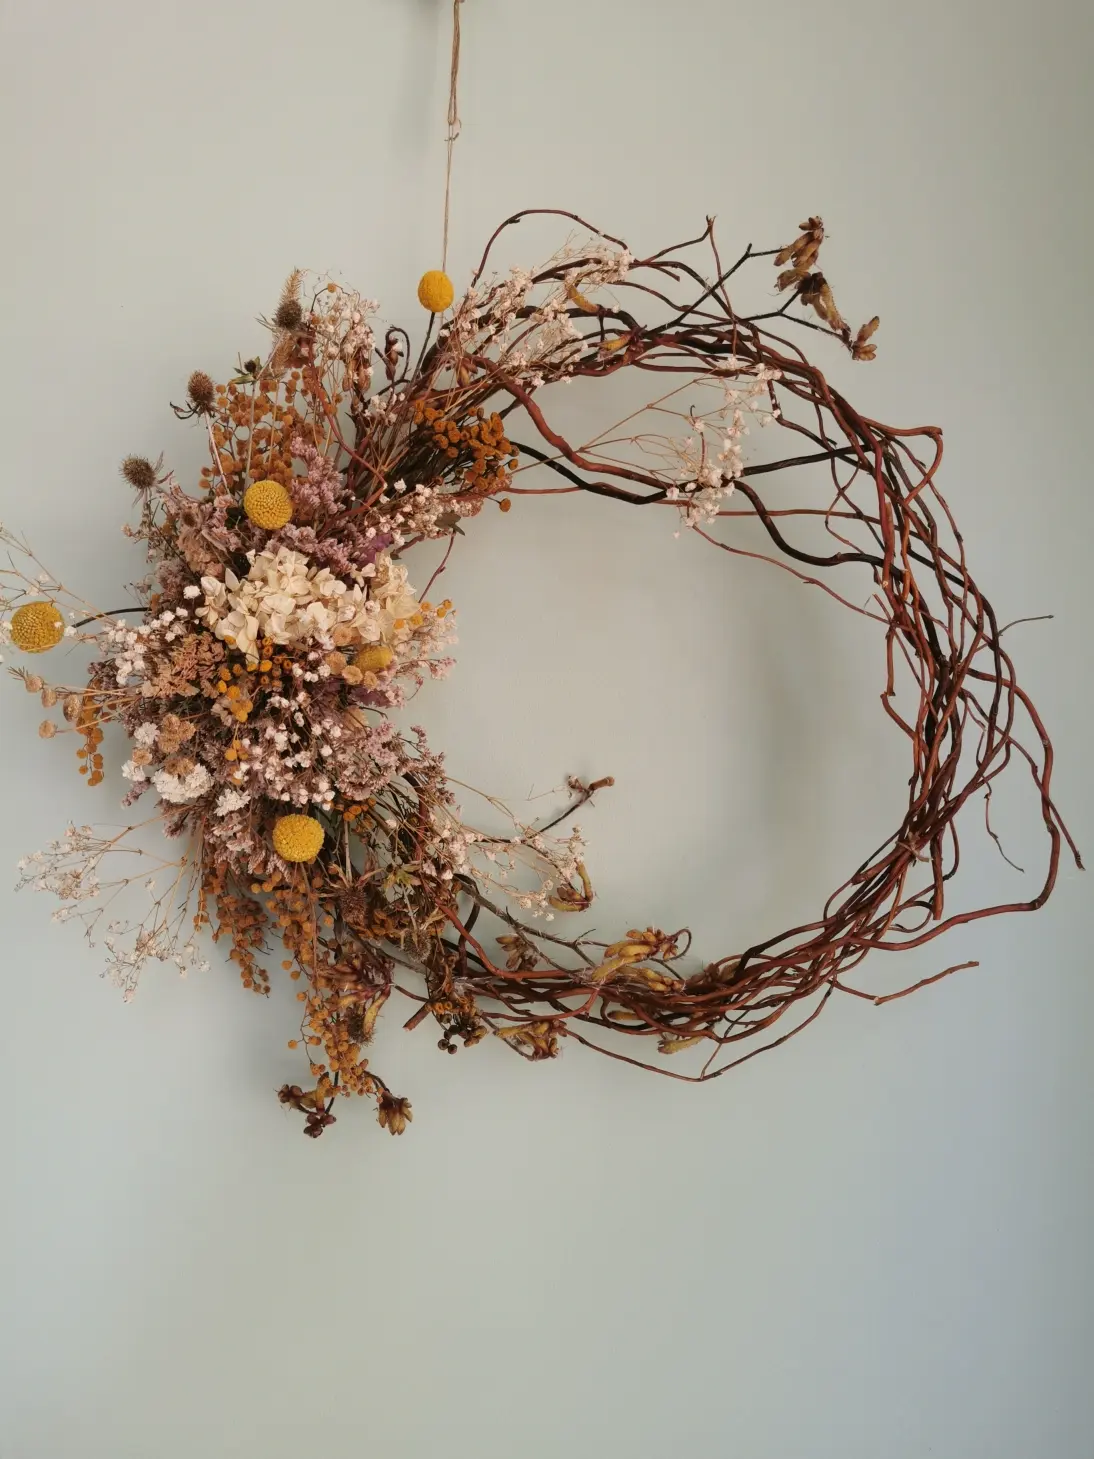 A subtle, space-age proposal for a garland on a wicker hoop with a brooch to the left.